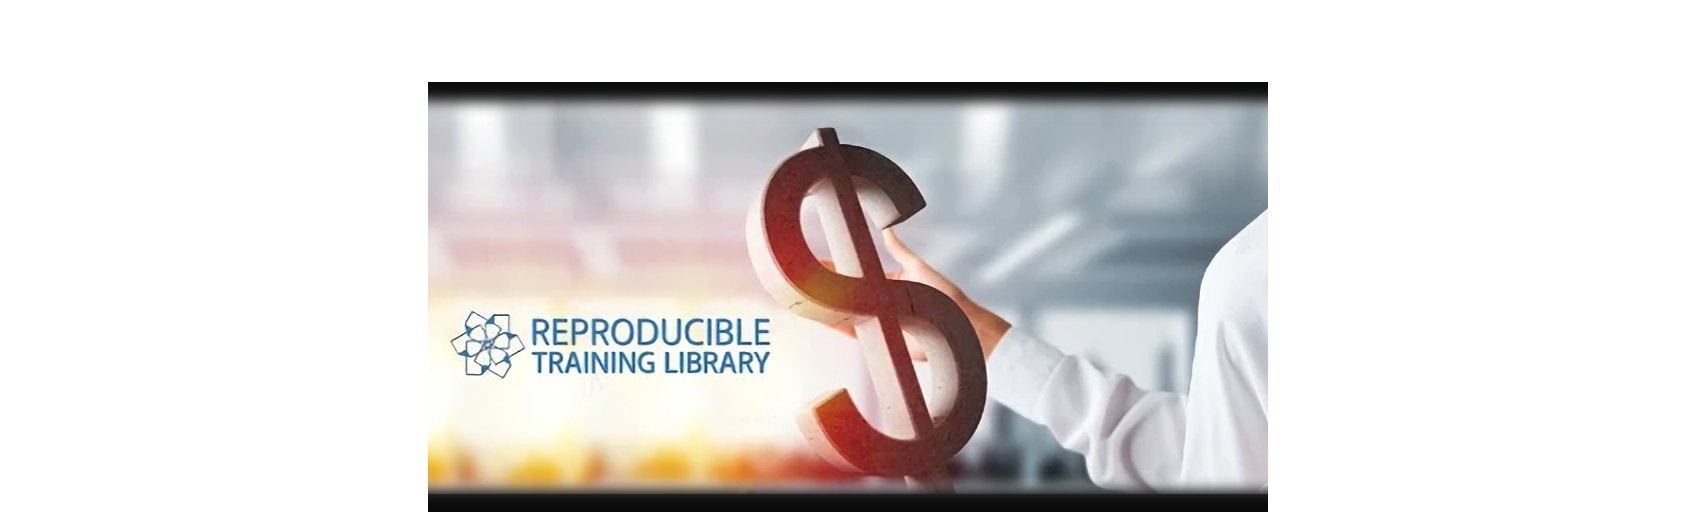 How an Organization saved $1 Million on Staff Training by Using HRDQ's Reproducible Training Library - HRDQ